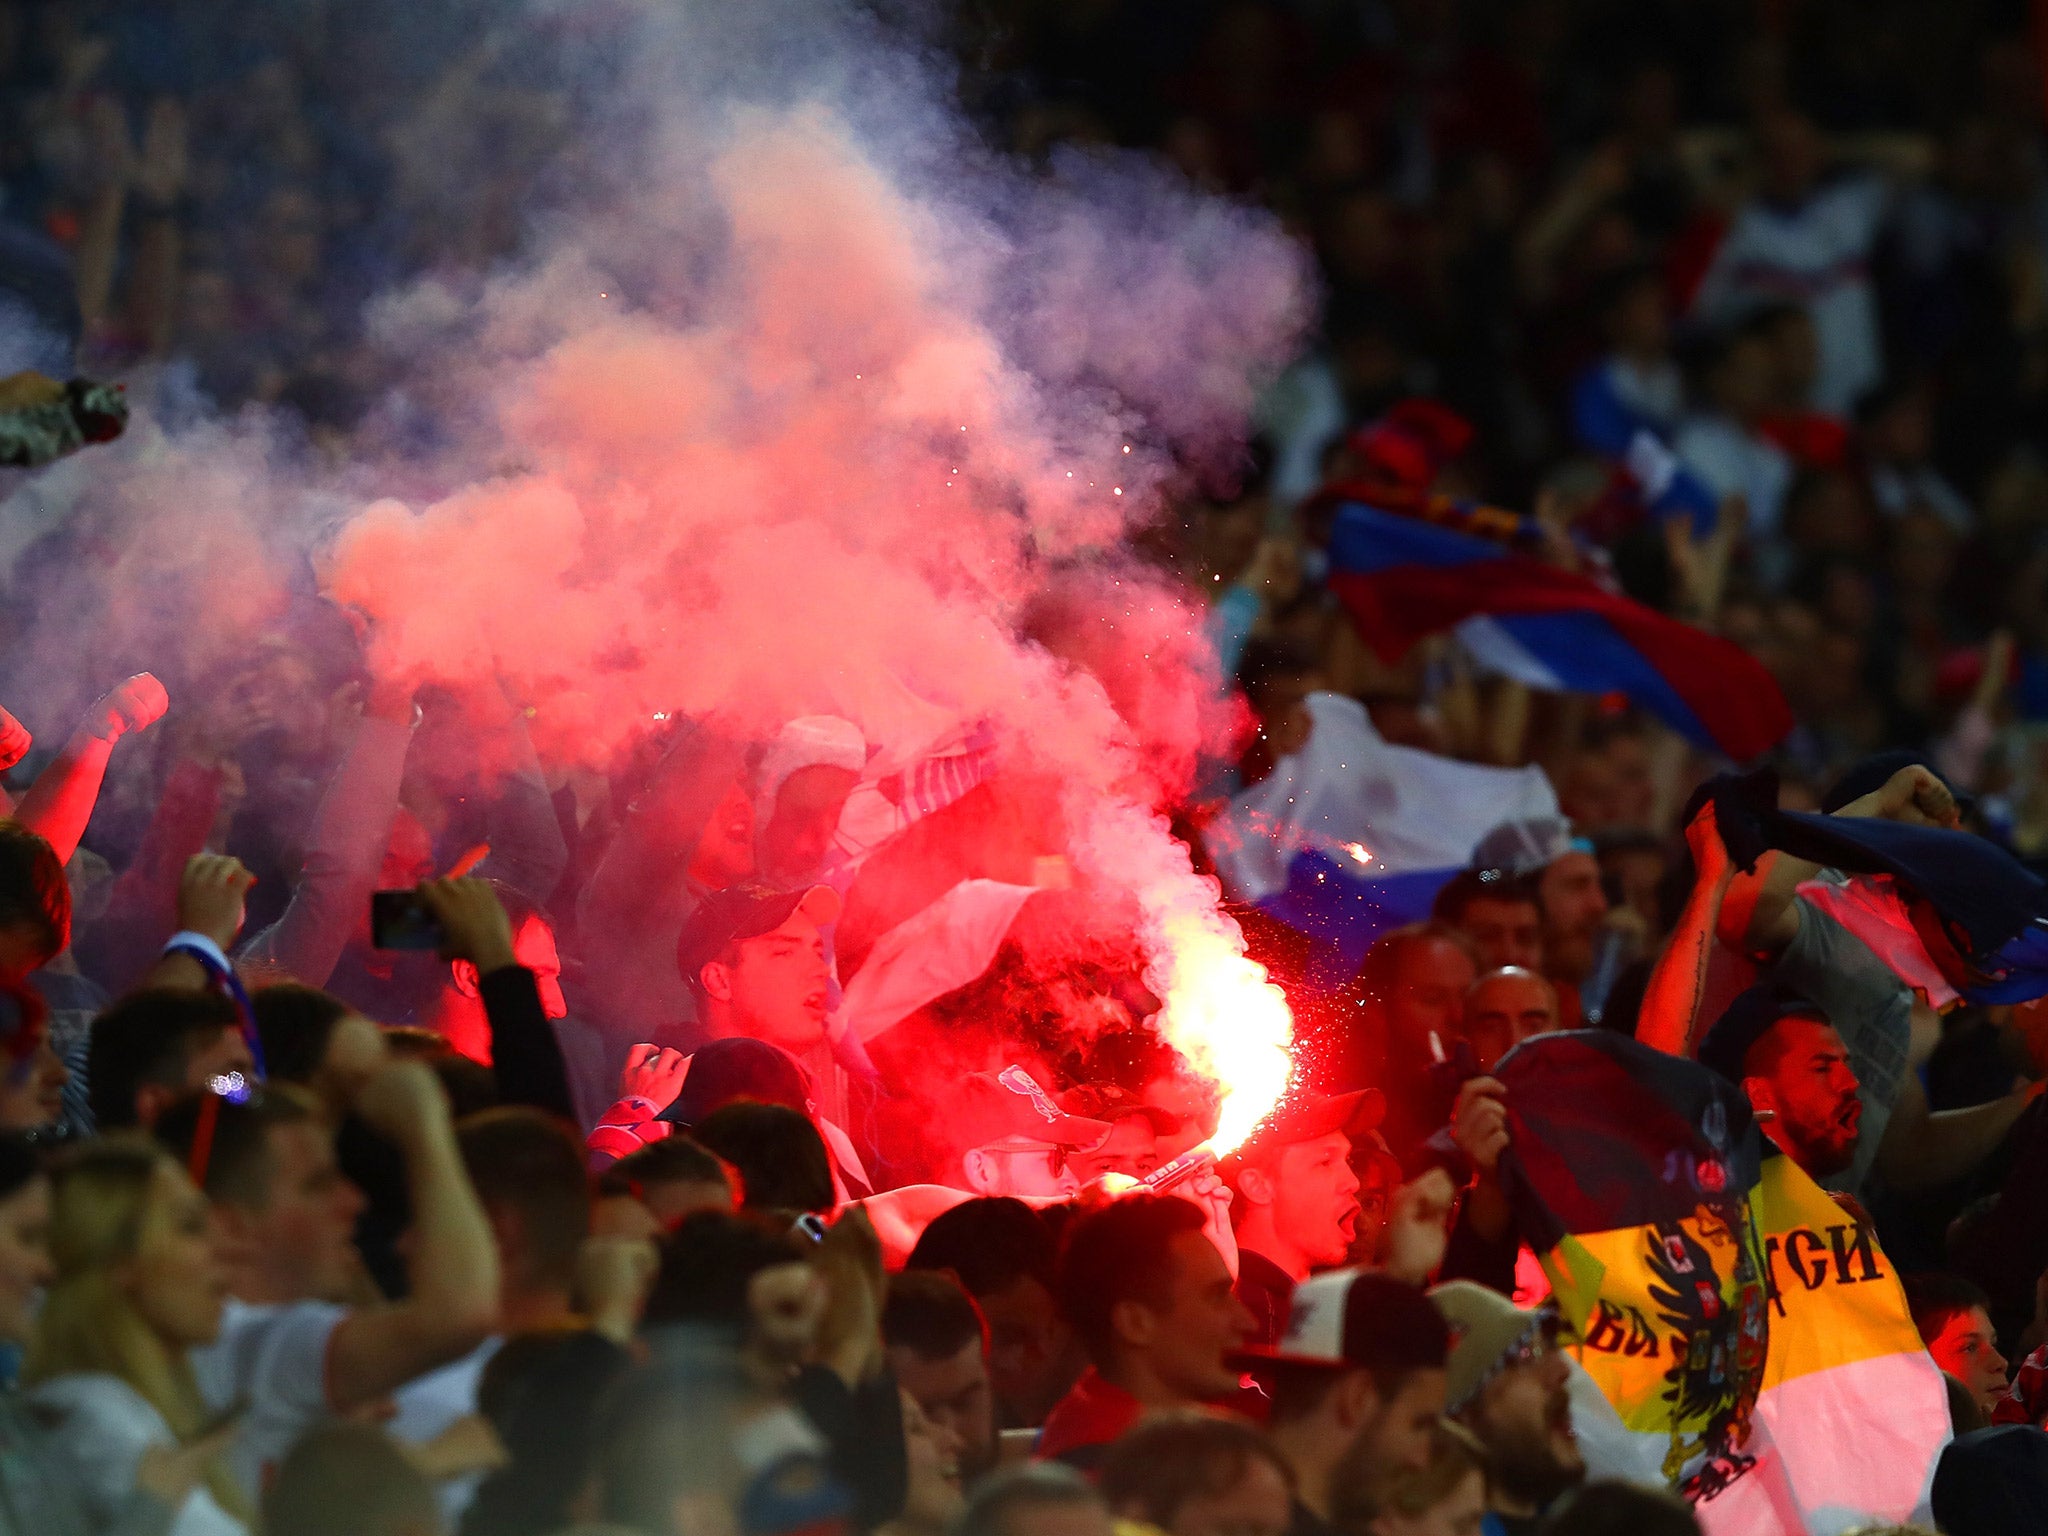 Russia fans light a flare in the Lille Metropole stands after Denis Glushikov's goal